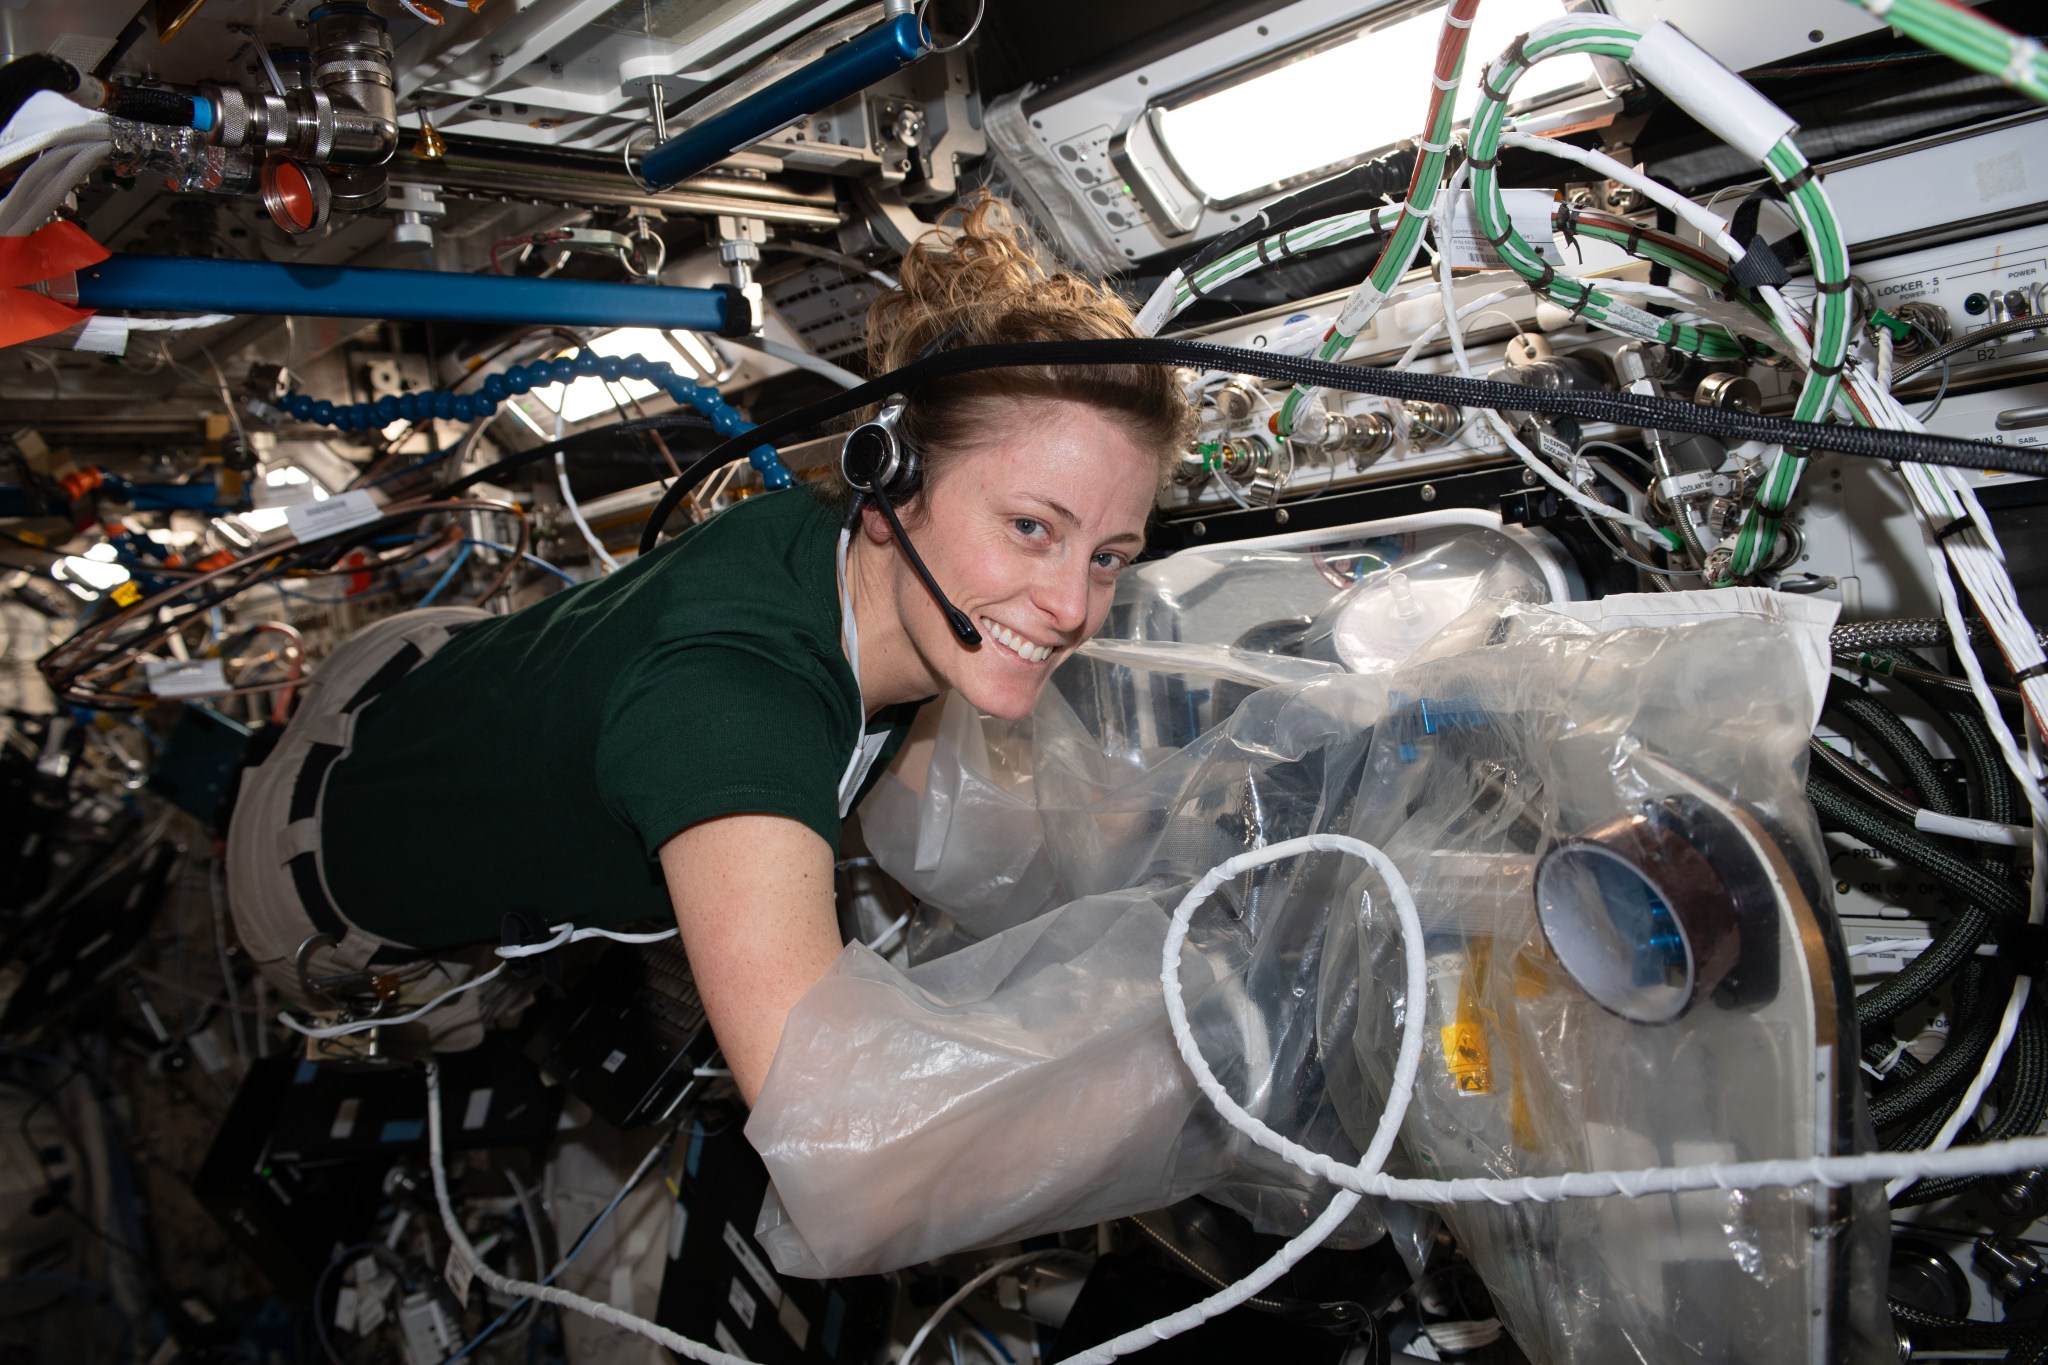 O'Hara is floating horizontally, smiling at the camera, her arms inside plastic sleeves of the BioFabrication Facility, which is connected to the wall to her right. She is wearing a green t-shirt and khaki pants and has a headset on. Several cords float in front of her.